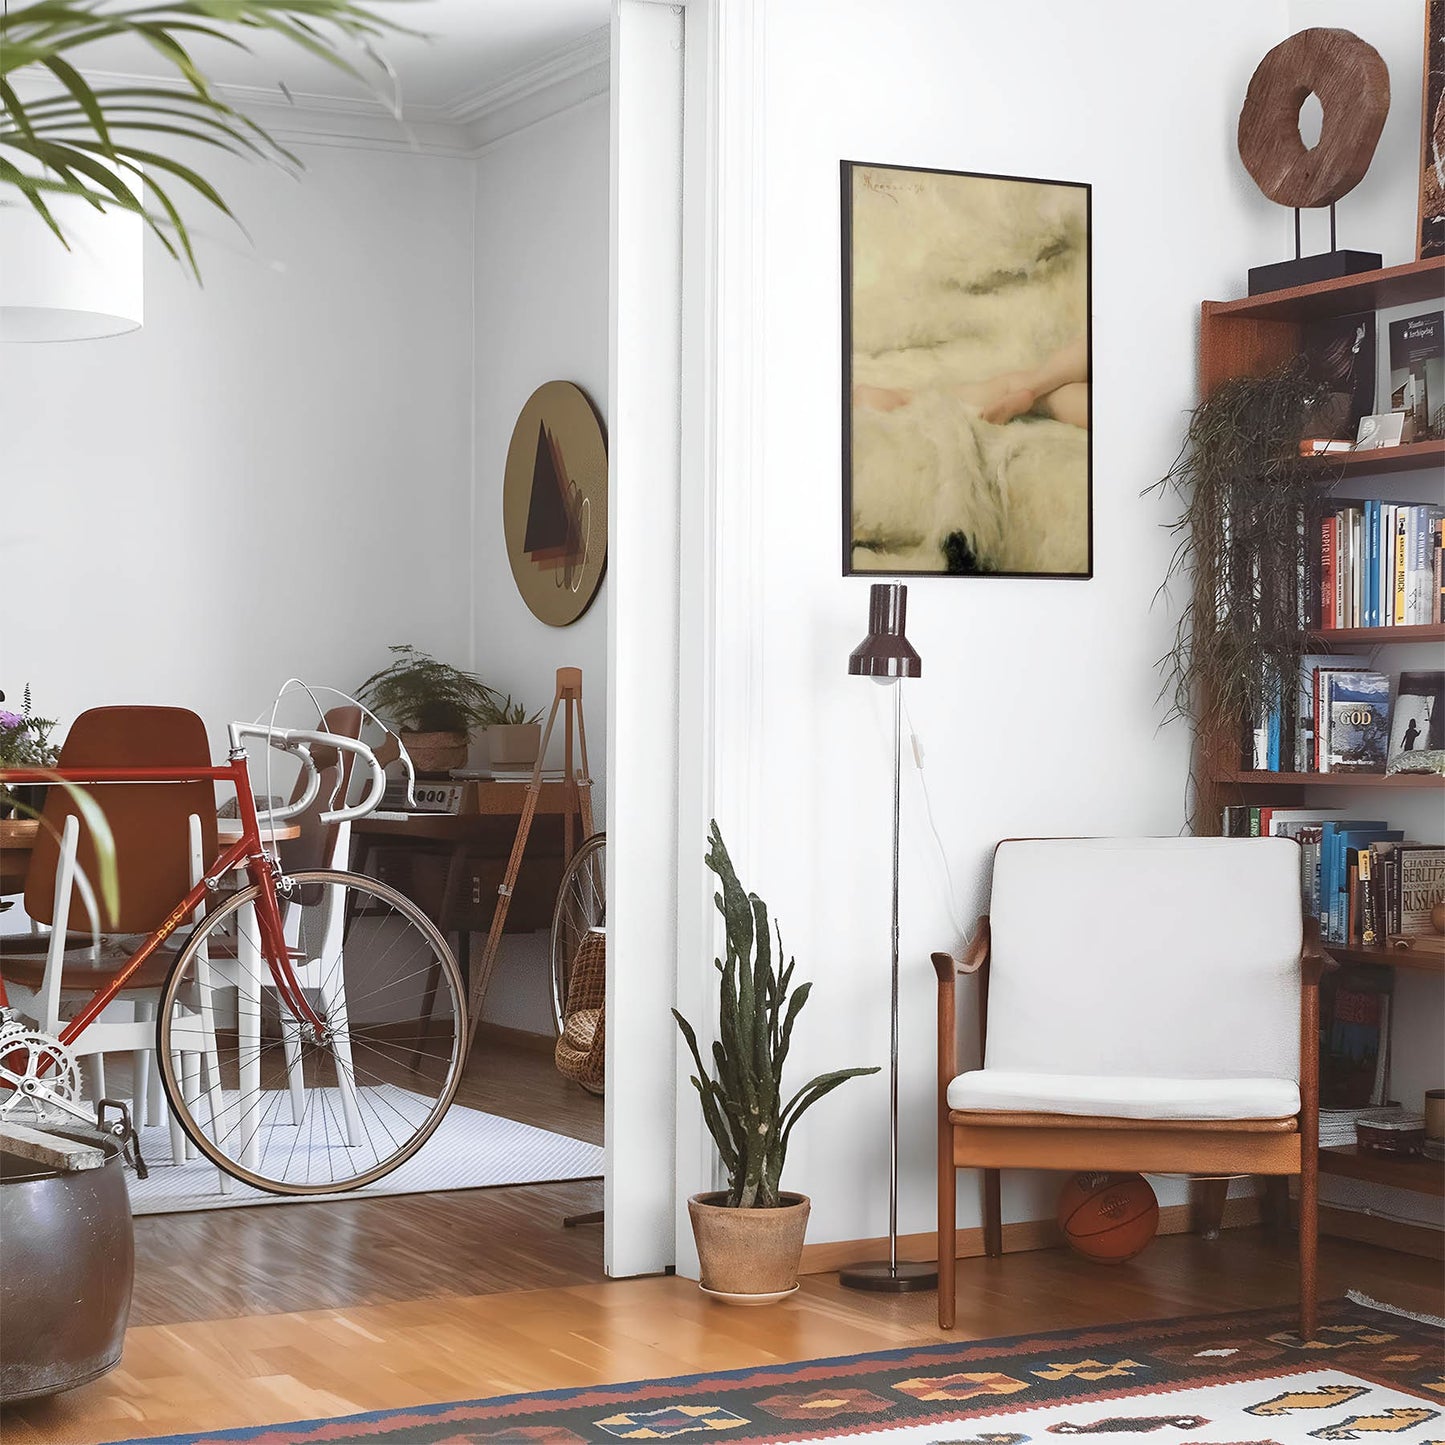 Eclectic living room with a road bike, bookshelf and house plants that features framed artwork of a Womans Legs on a White Fur Blanket above a chair and lamp